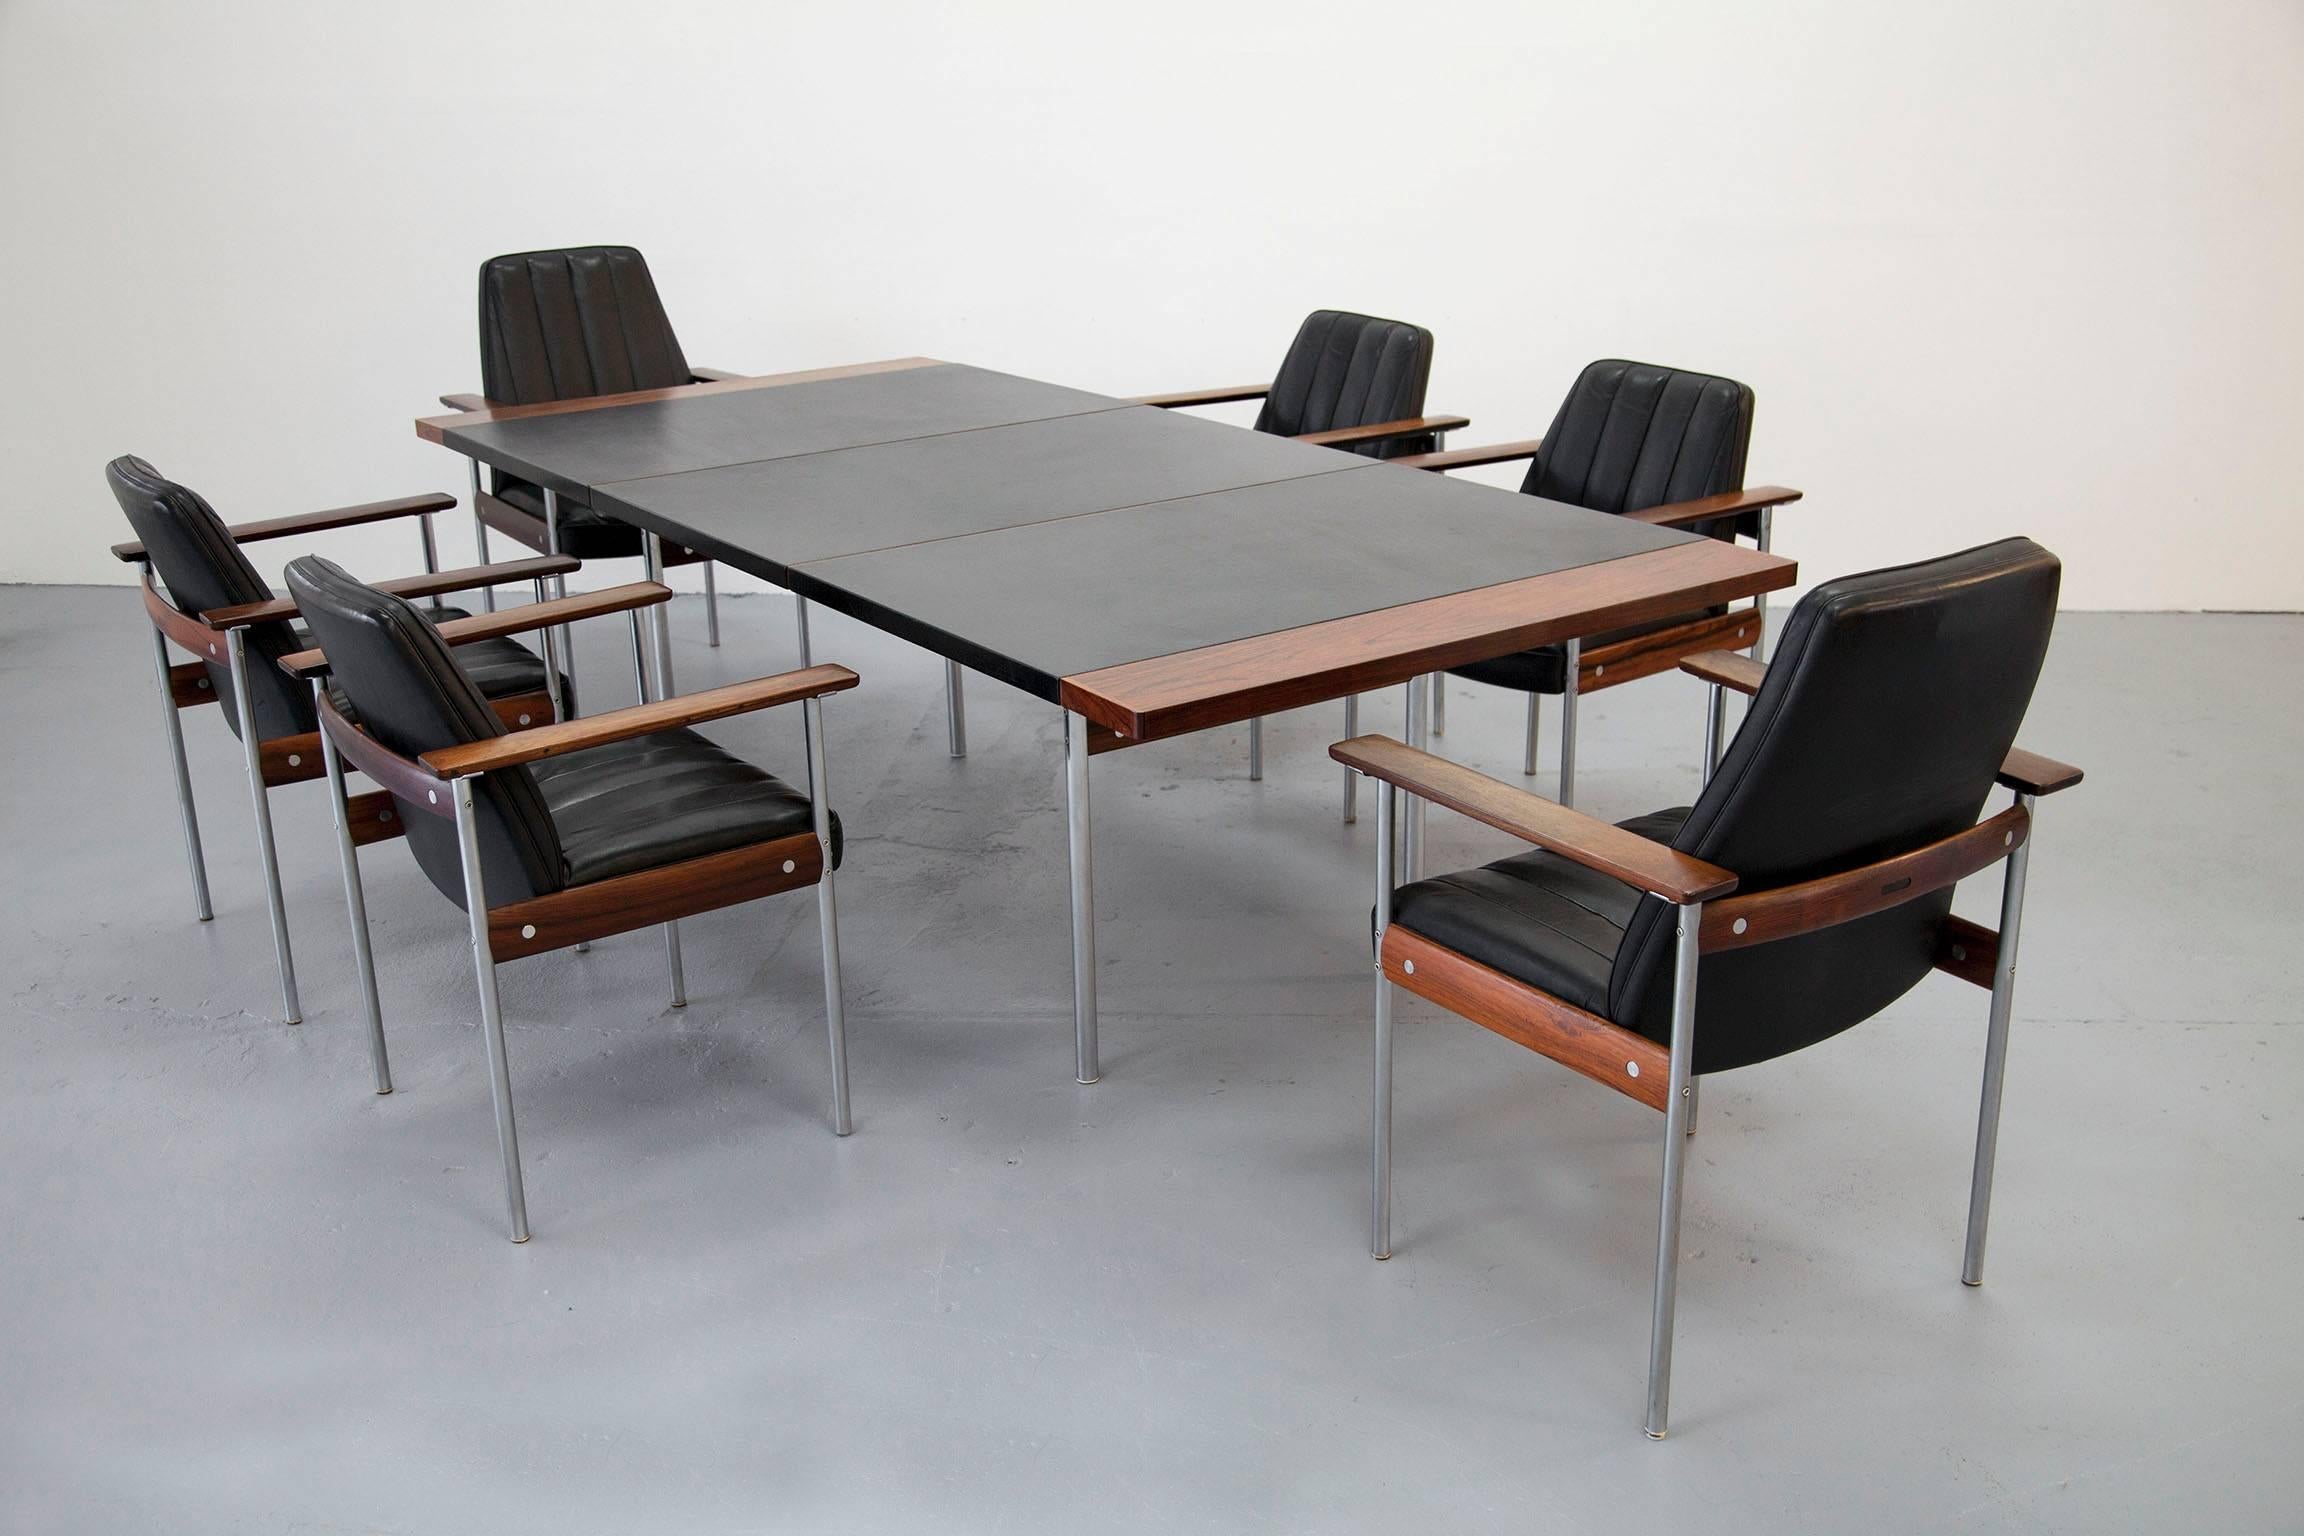 Great set designed by Sven Dysthe consisting of six rosewood arm chairs (two highback chairs) and great table. This set is produced by Dokka, Norway. 

Dimensions:
Table: 110x240x75 cm. 
Chairs: 56cmx64cmx84cm [WxDxH].
Higback Chairs: